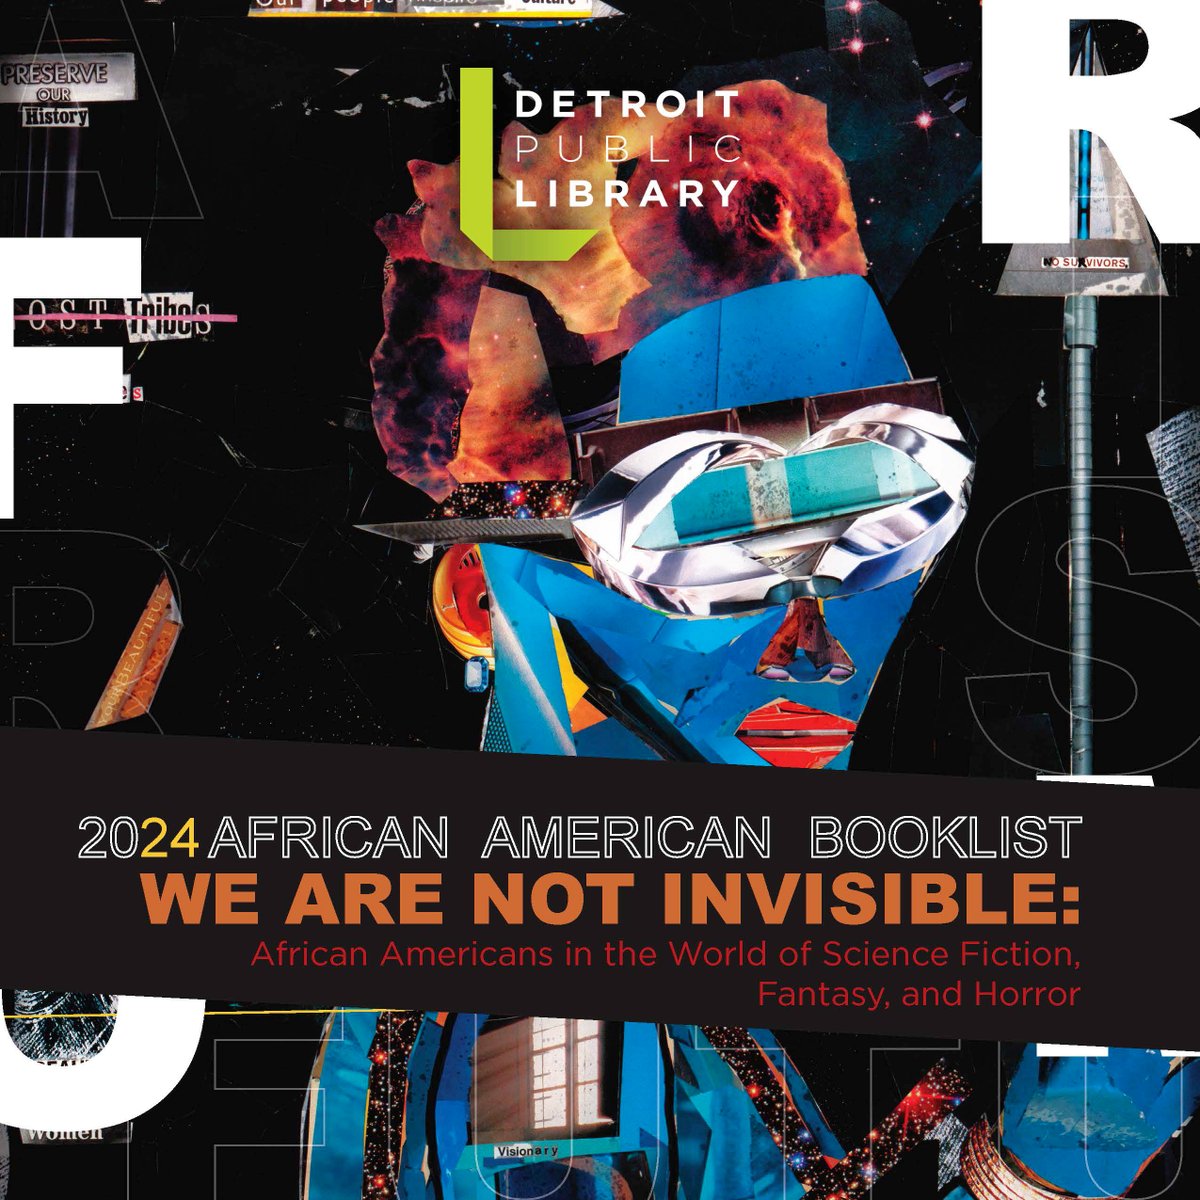 The #detroitpubliclibrary 2024 African American Booklist is now available! This year's theme is 'We Are Not Invisible: African Americans in the World of Science Fiction, Horror and Fantasy.' #NationalLibraryWeek